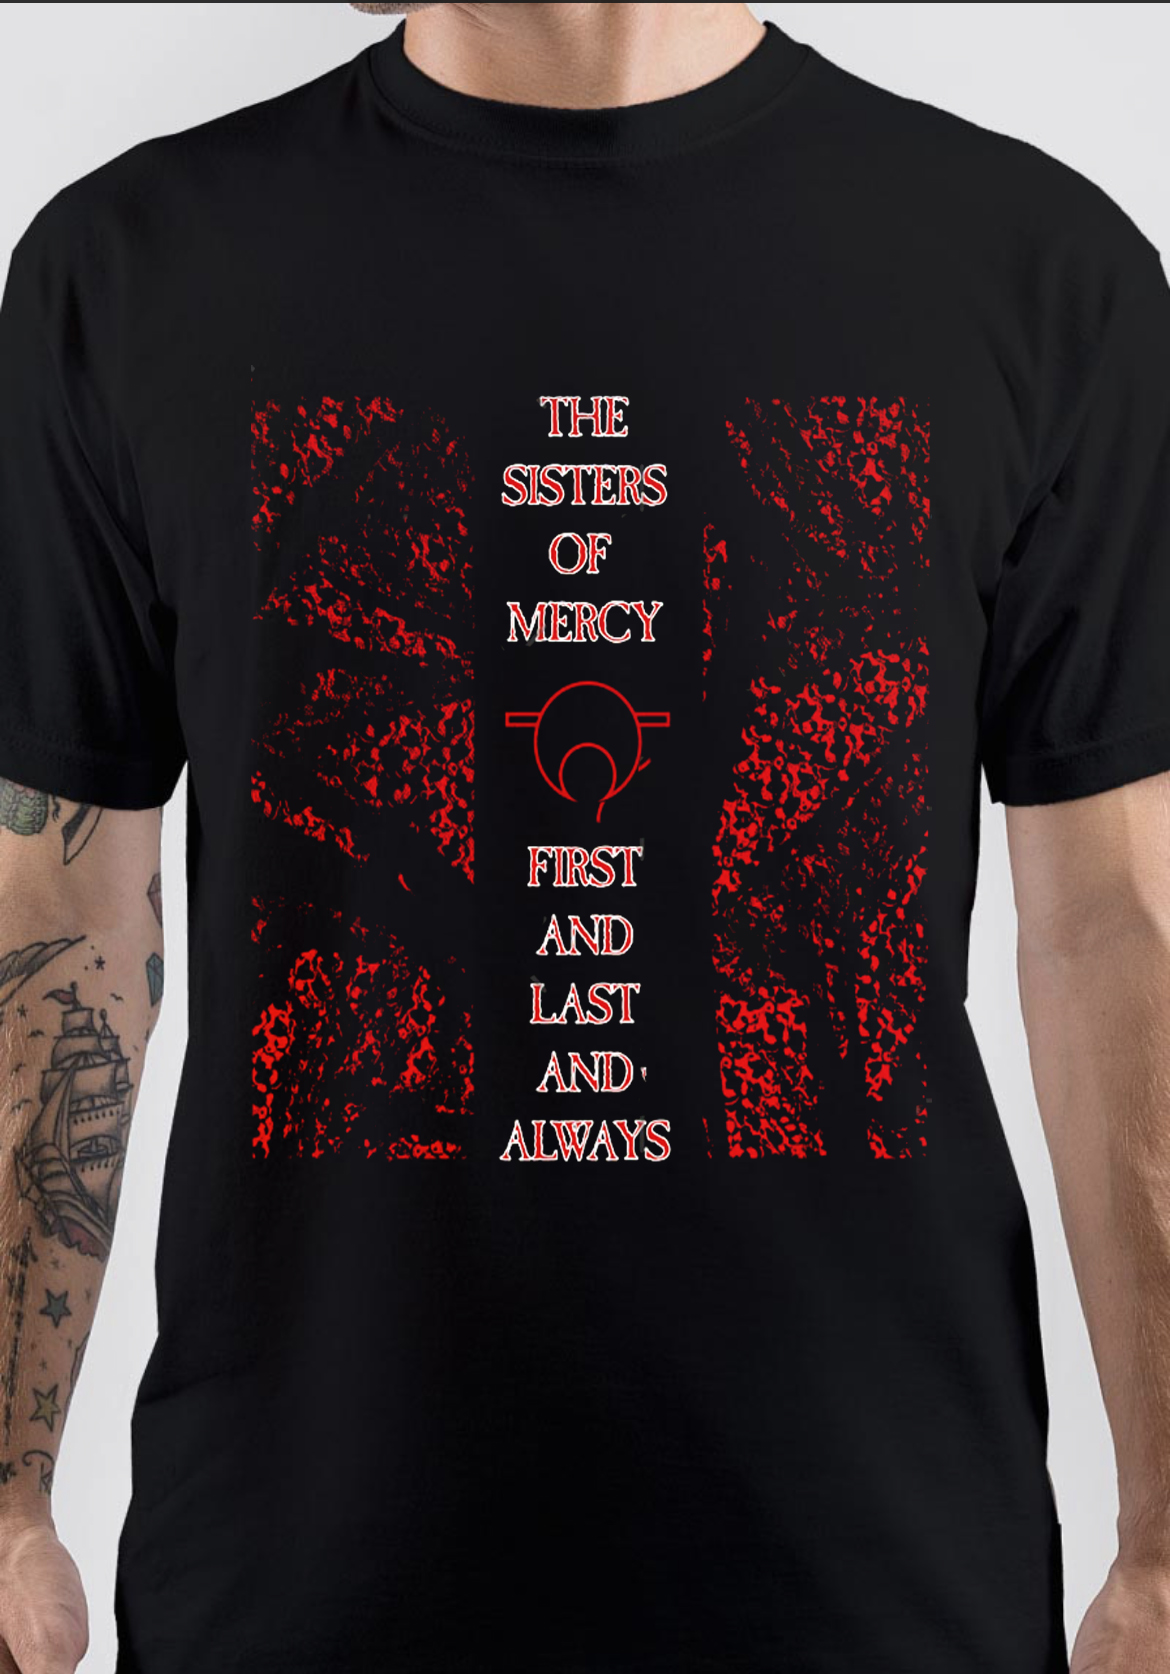 The Sisters Of Mercy T-Shirt And Merchandise